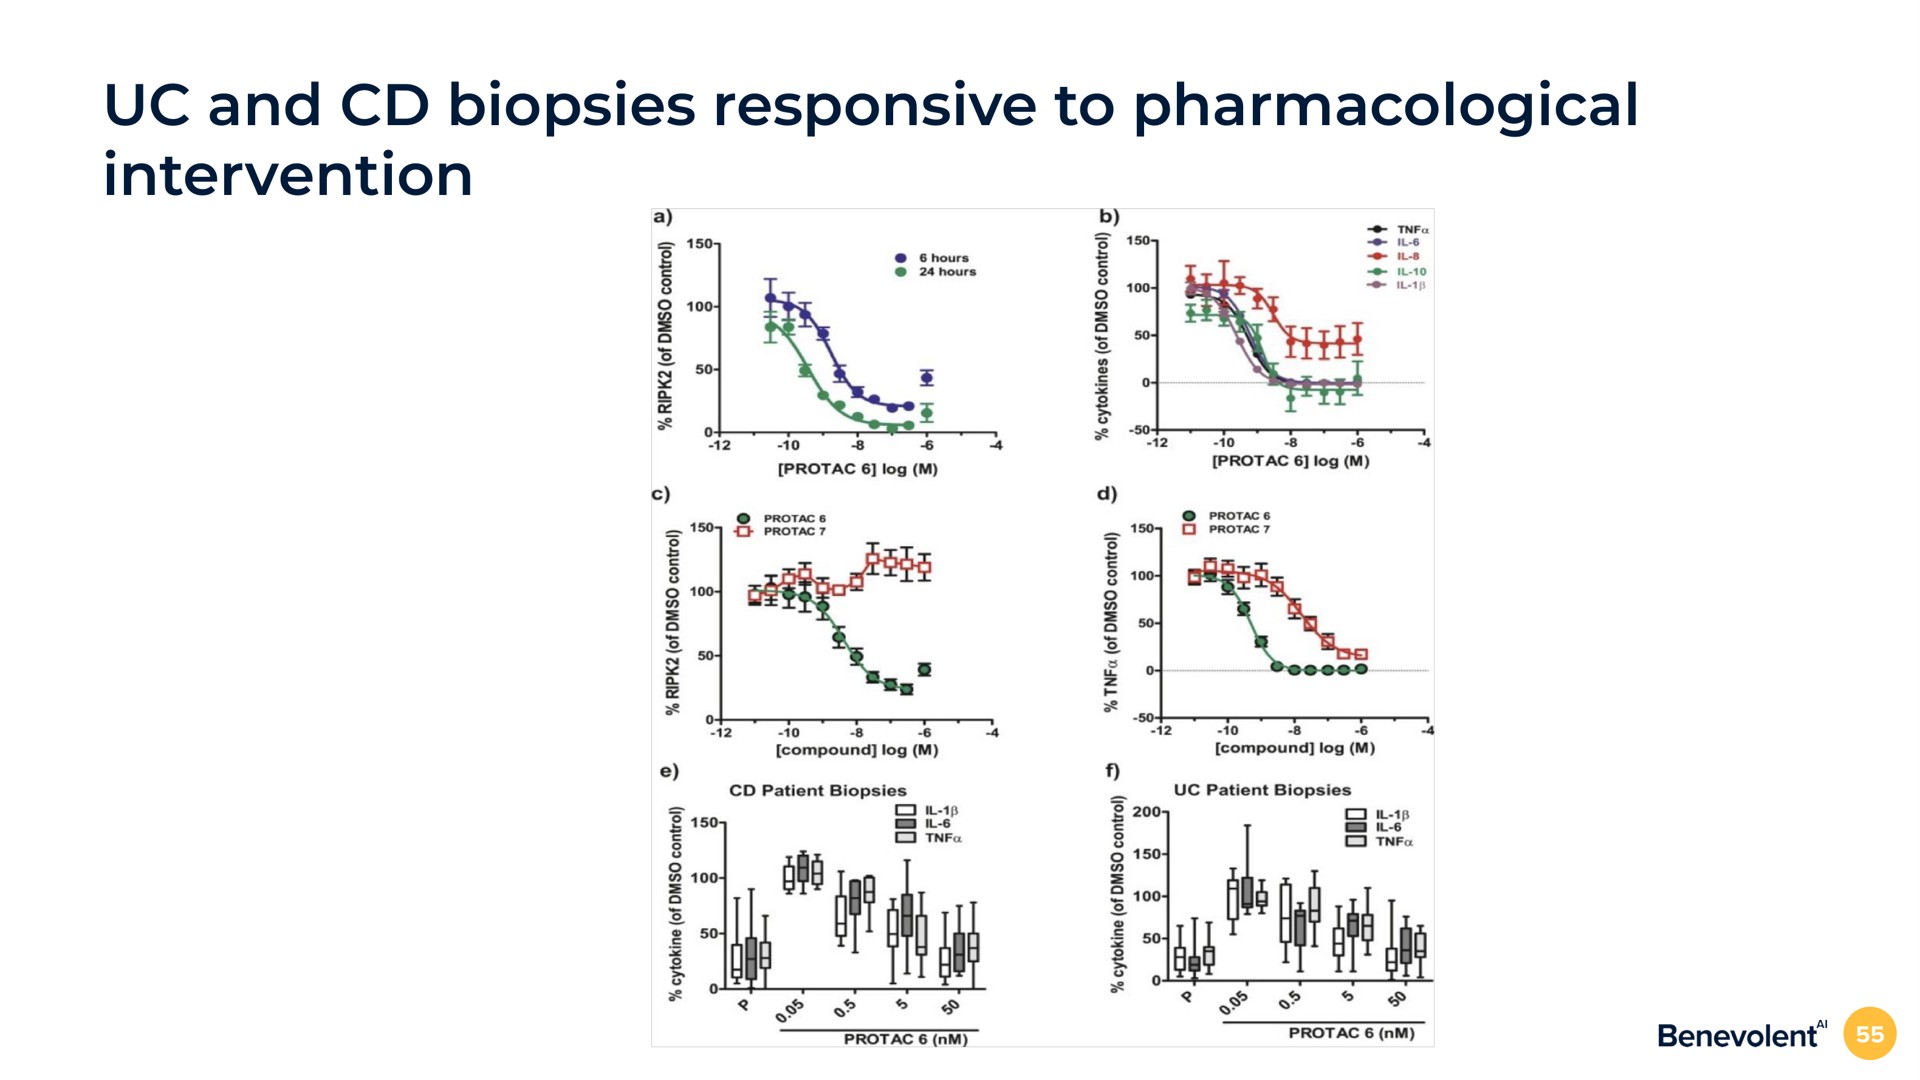 and biopsies responsive to pharmacological intervention | BenevolentAI